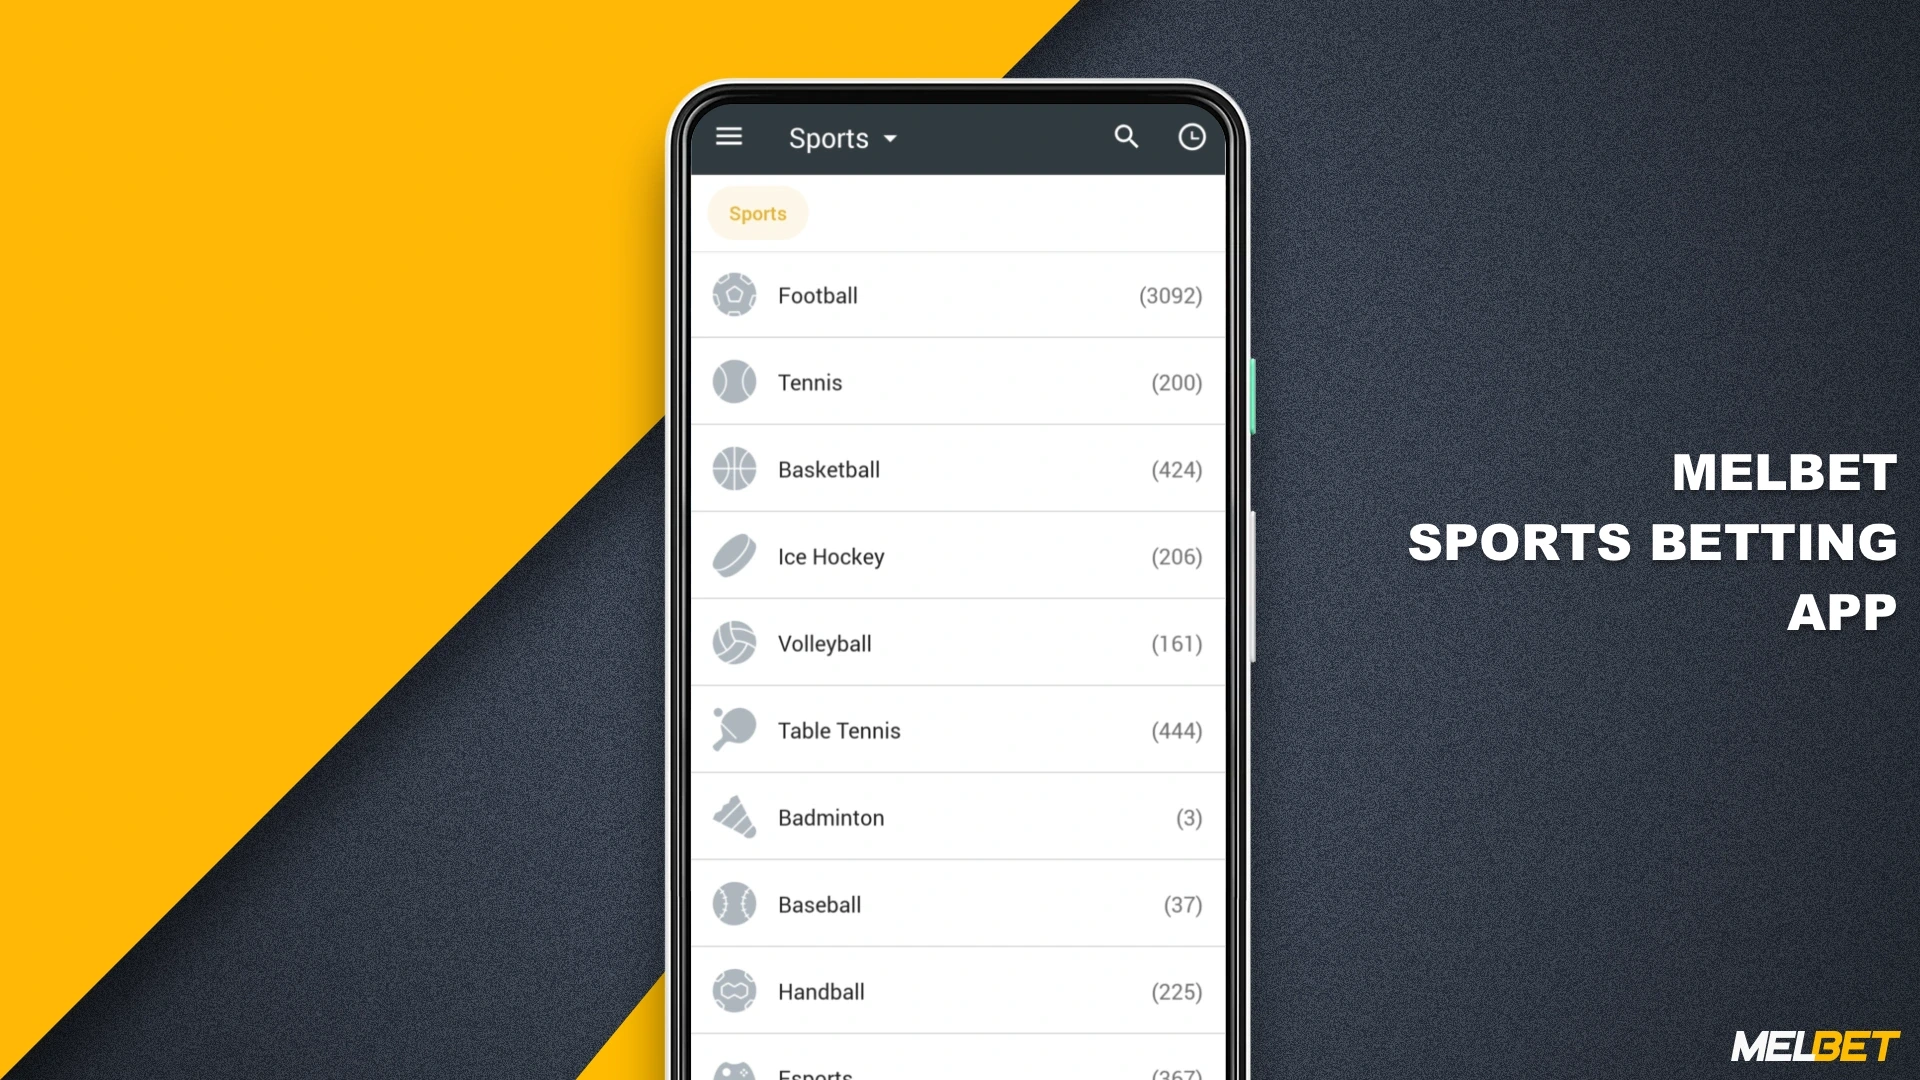 In the Melbet app you can bet on a wide variety of sports, including cricket, soccer, horse racing and more